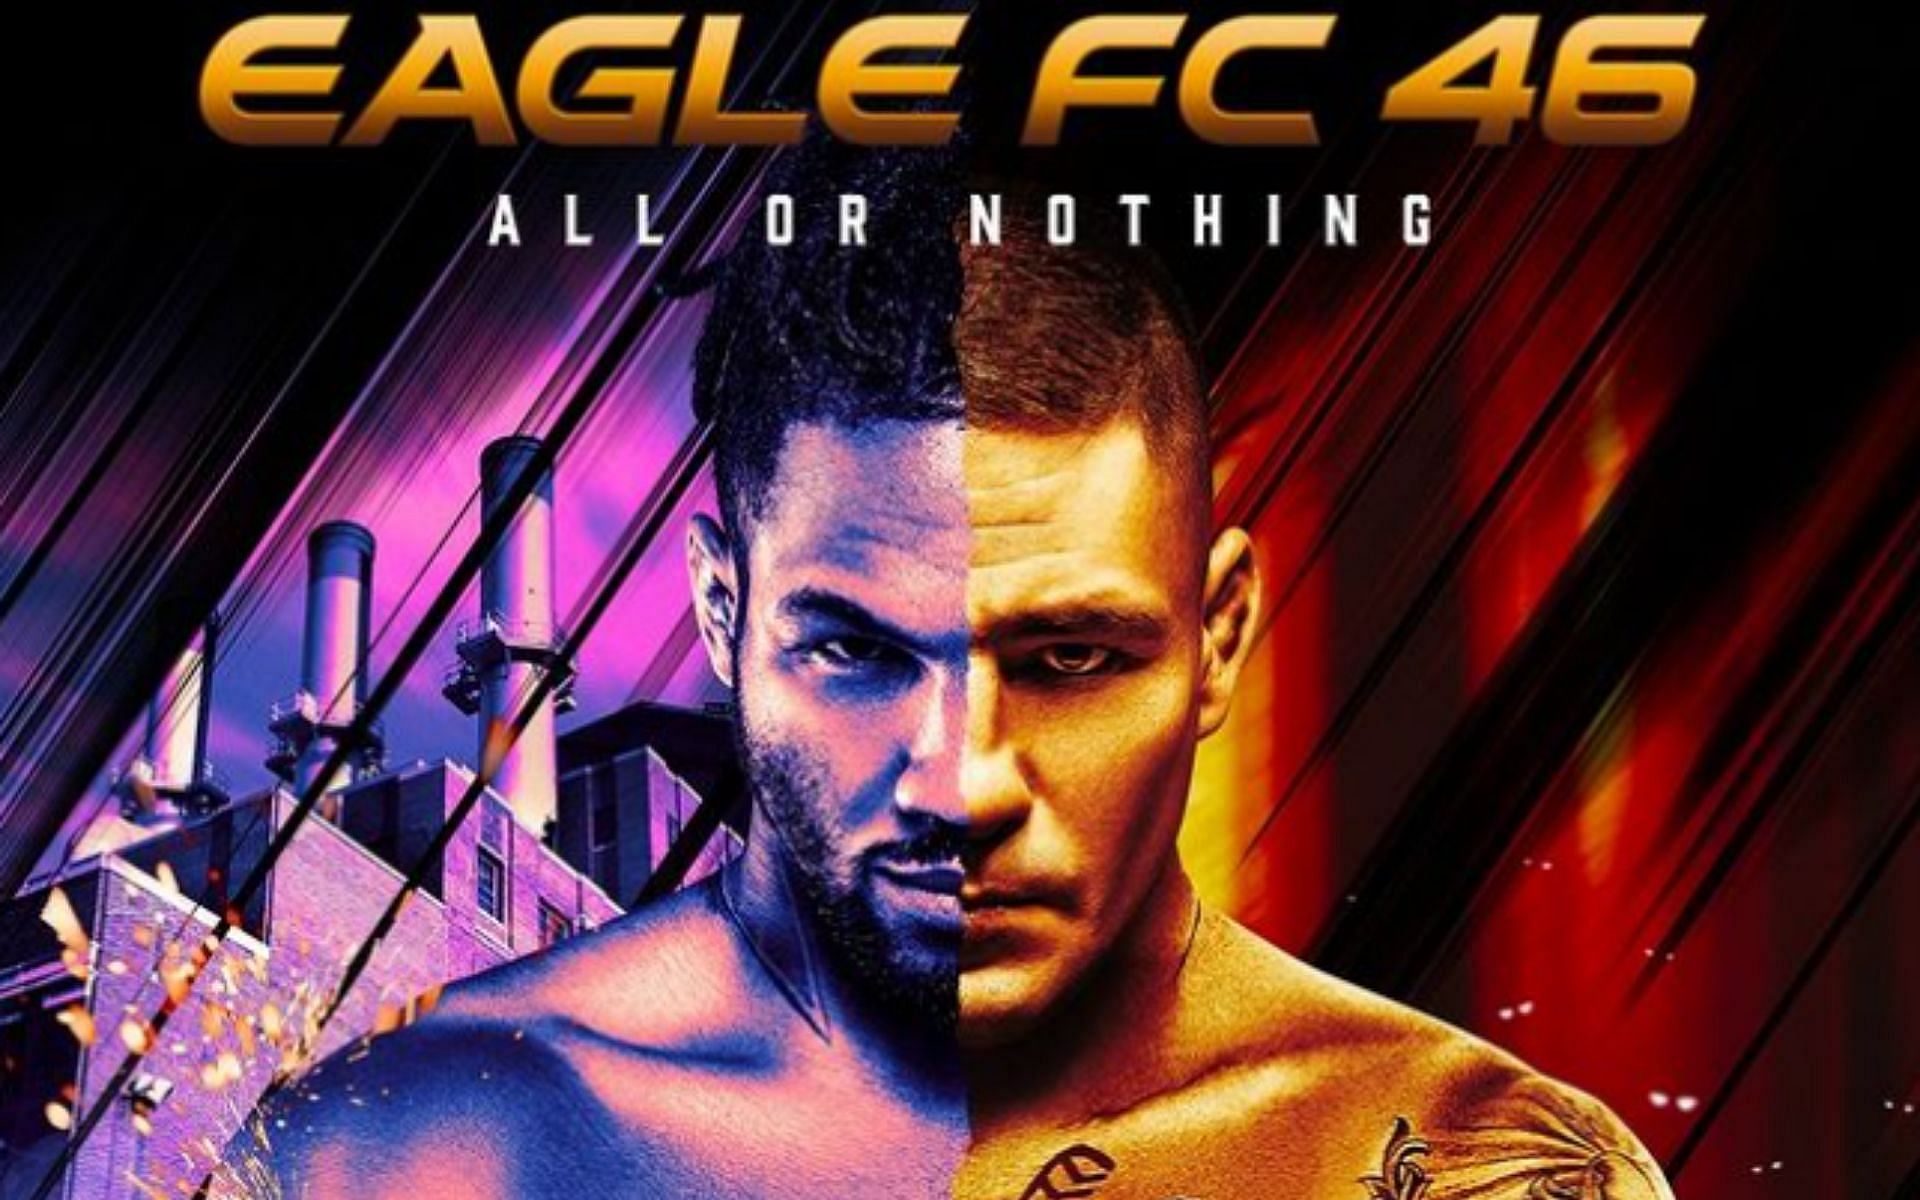 Eagle FC 46 was headlined by Diego Sanchez and Kevin Lee